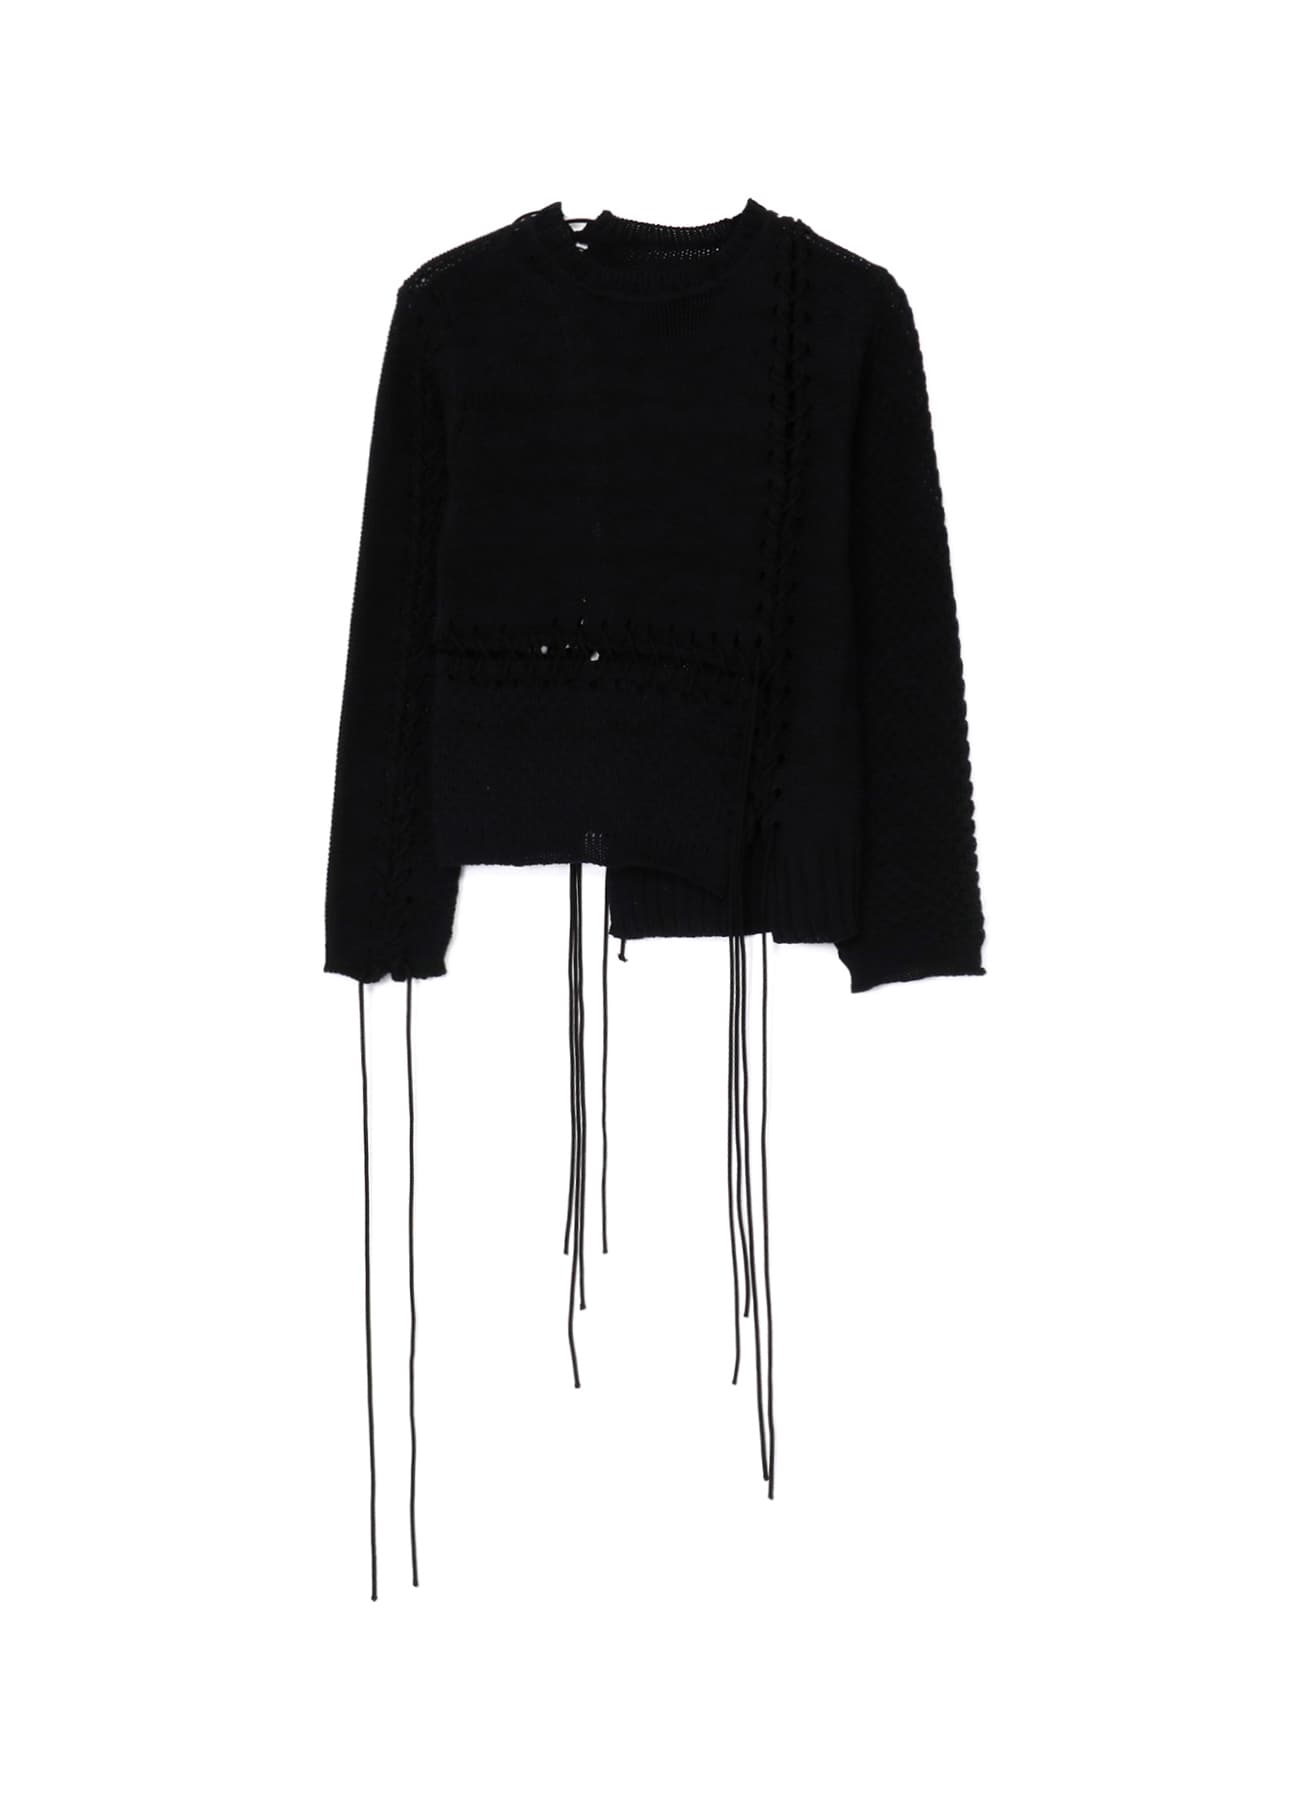 TUCK JERSEY LACE UP SHORT PULLOVER(S Black): Y's｜THE SHOP YOHJI